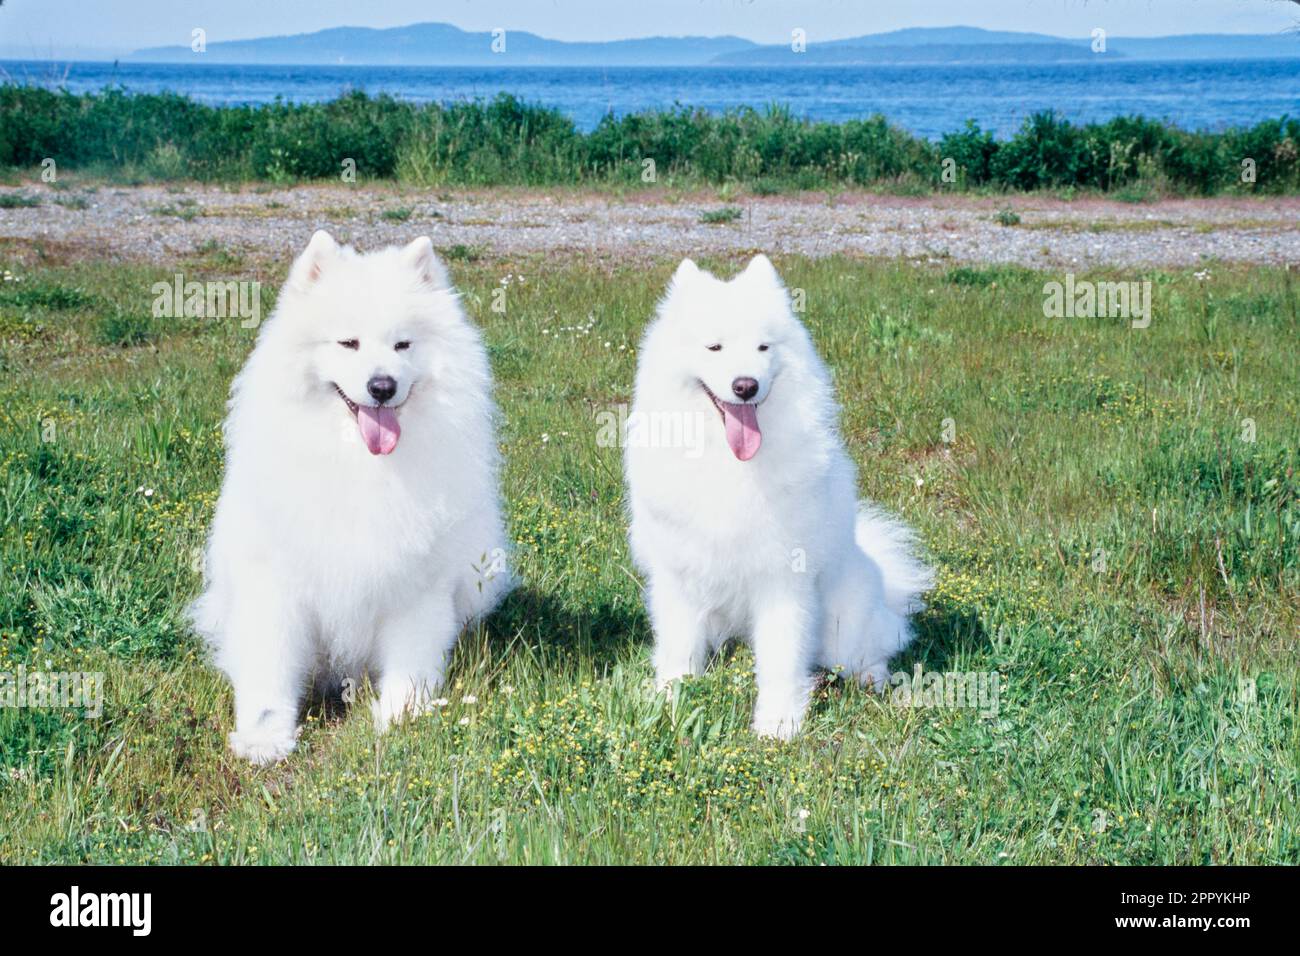 Samoyeds sitting in grass with mountains in distance Stock Photo